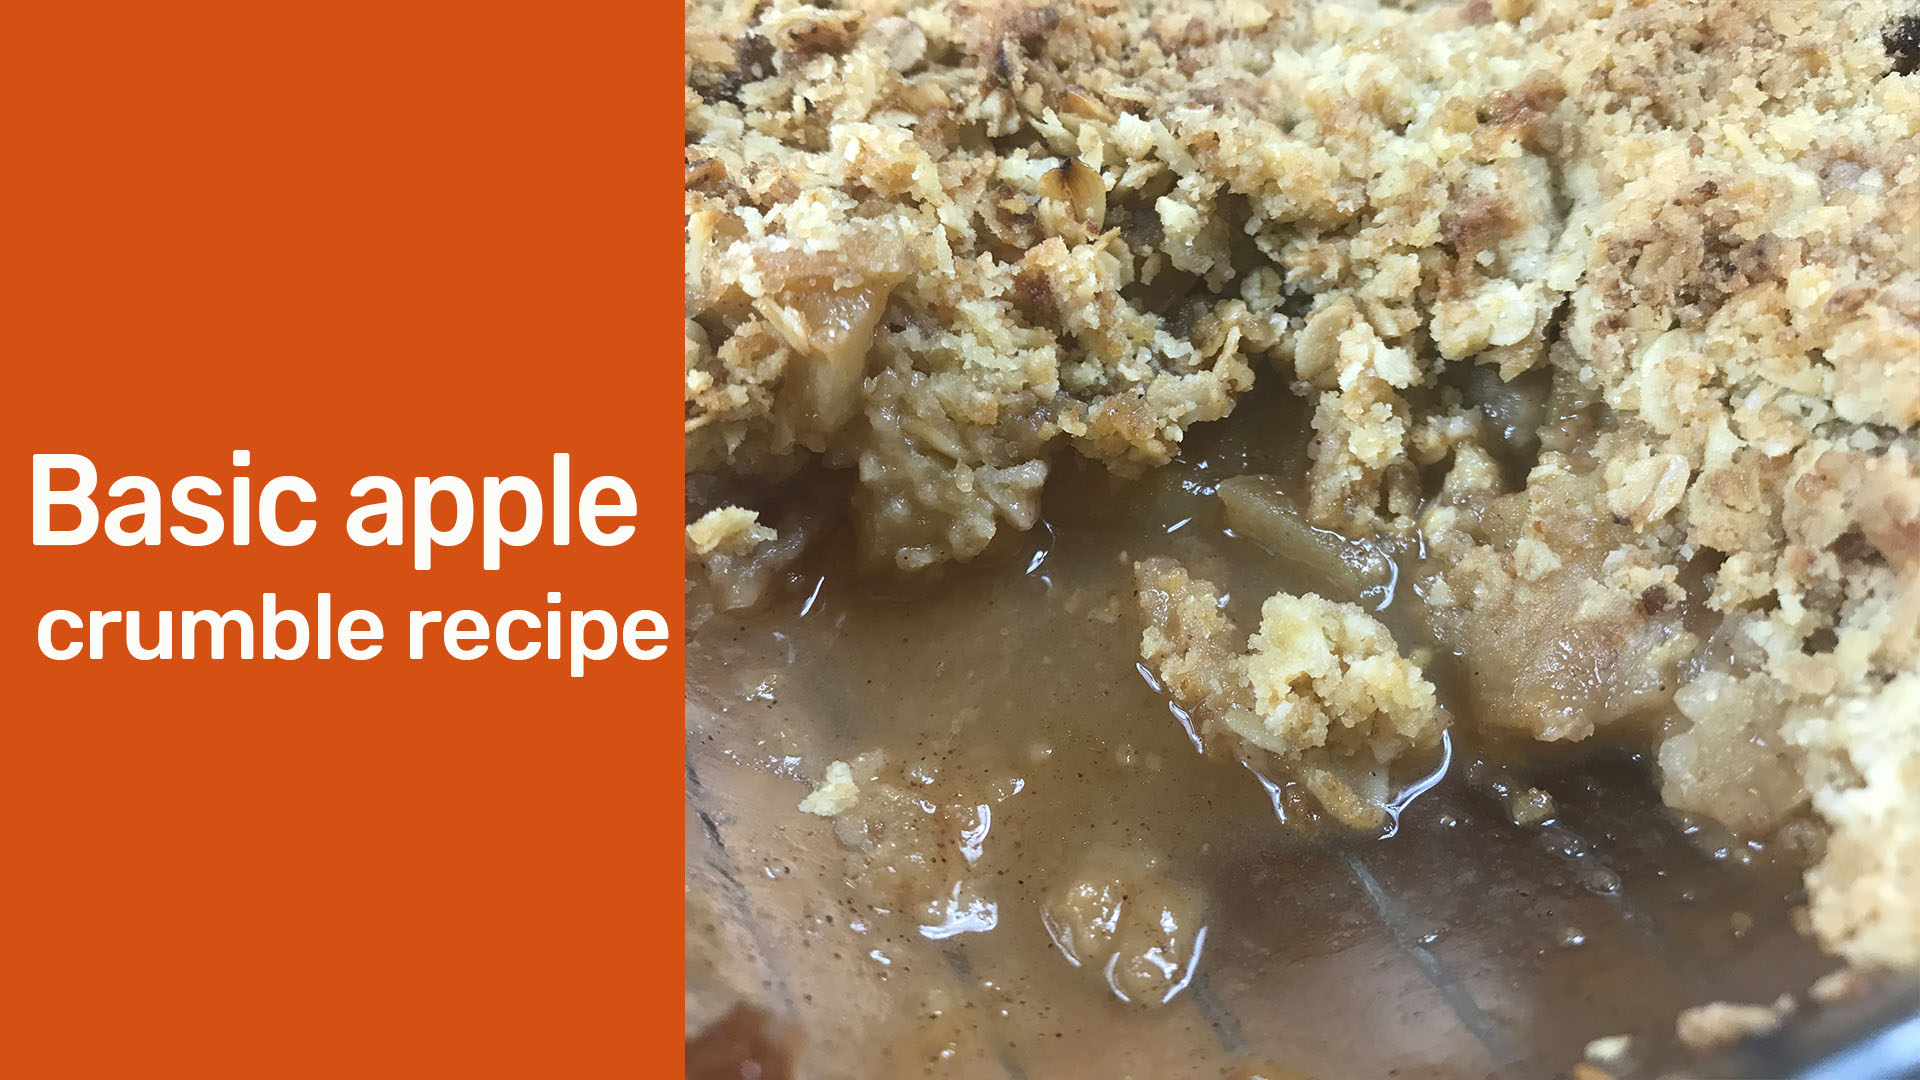 Basic apple crumble recipe : Apple crumble topping